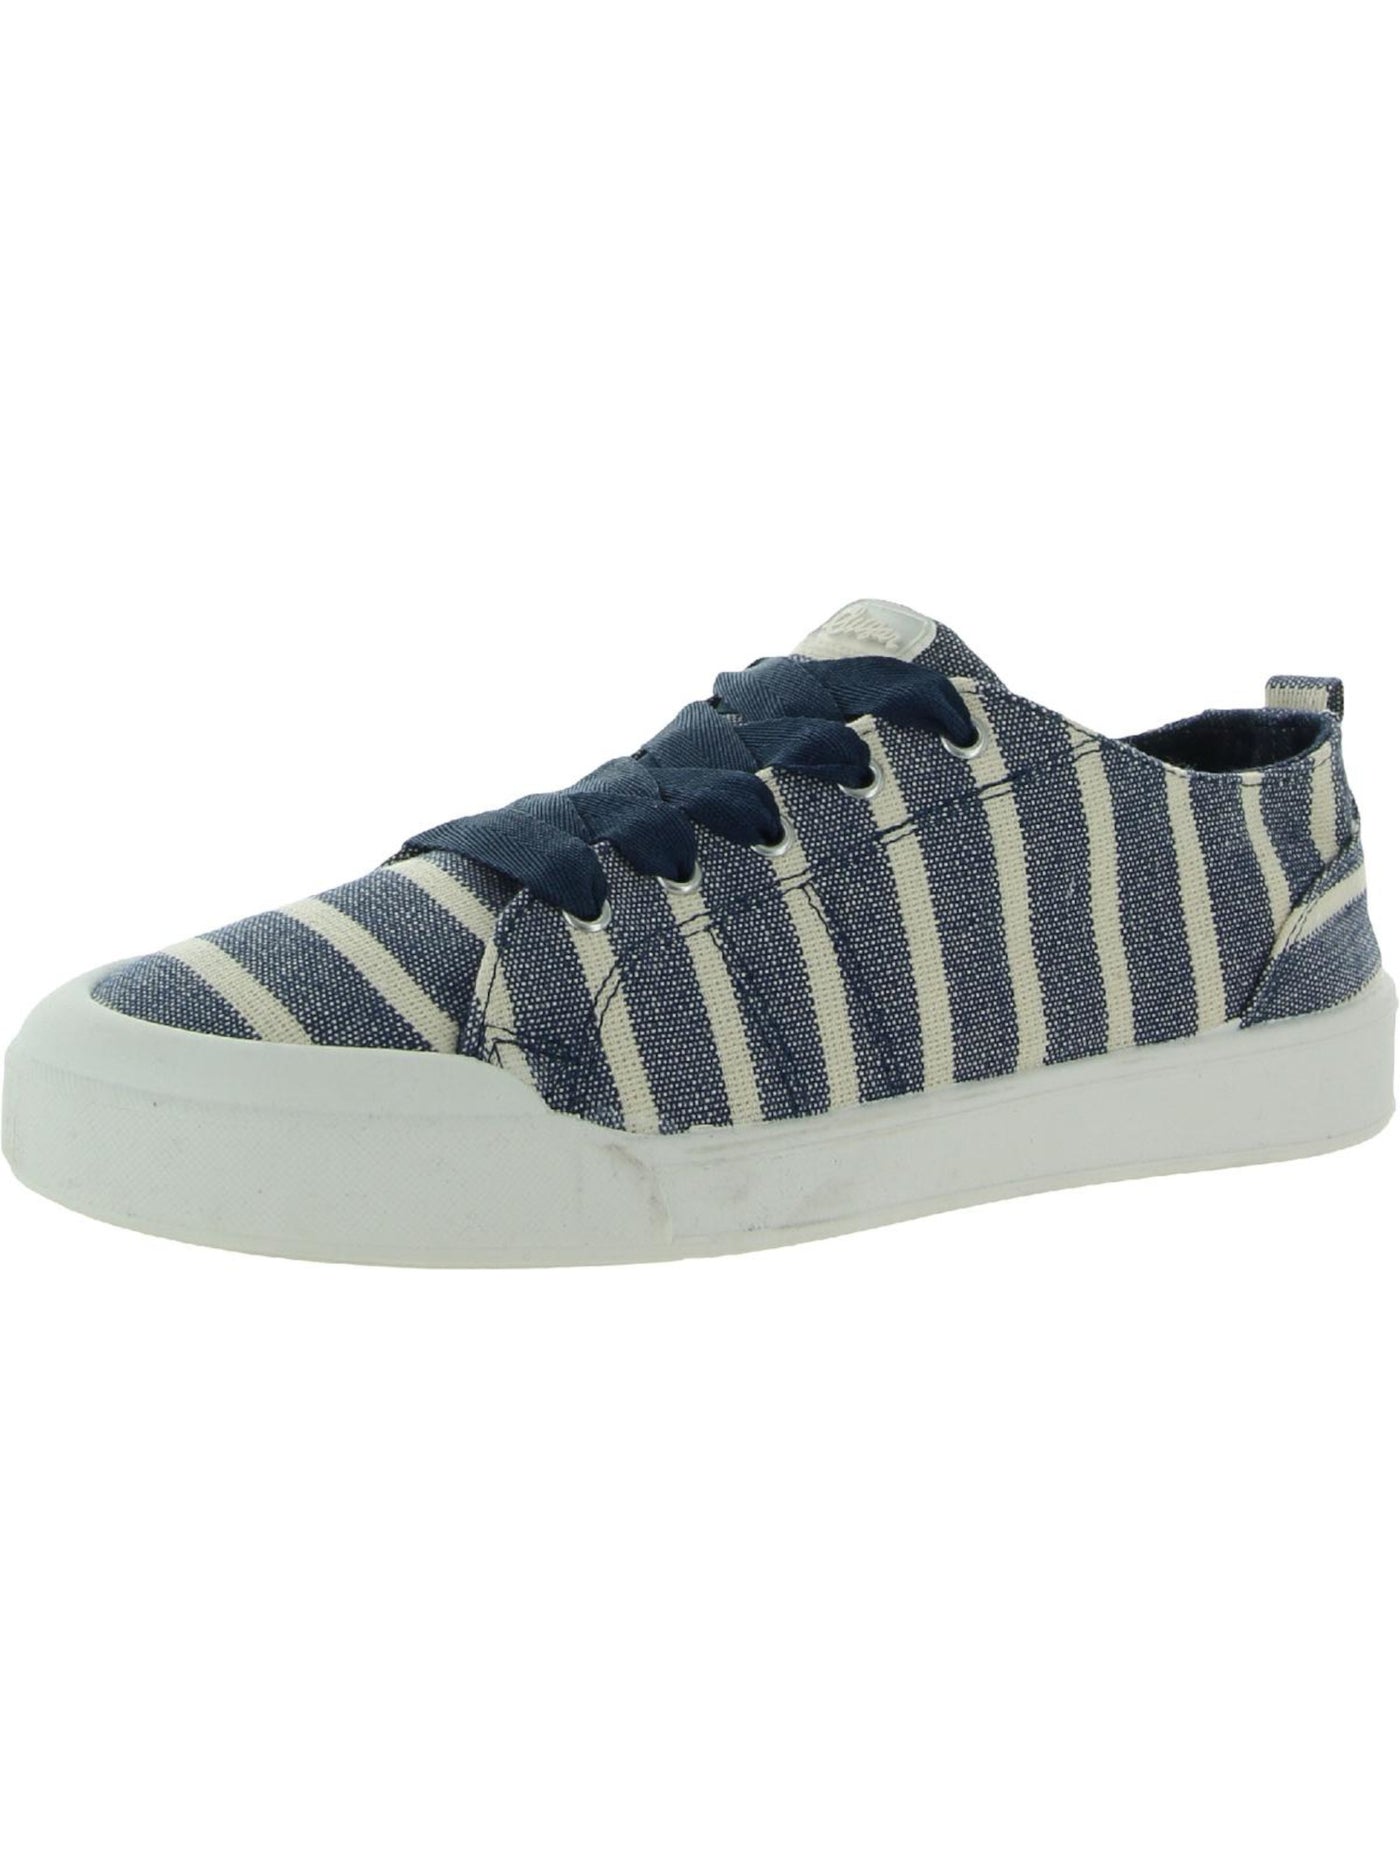 SUGAR Womens Navy Blue Striped Cushioned Festival Round Toe Lace-Up Athletic Sneakers Shoes 10 M